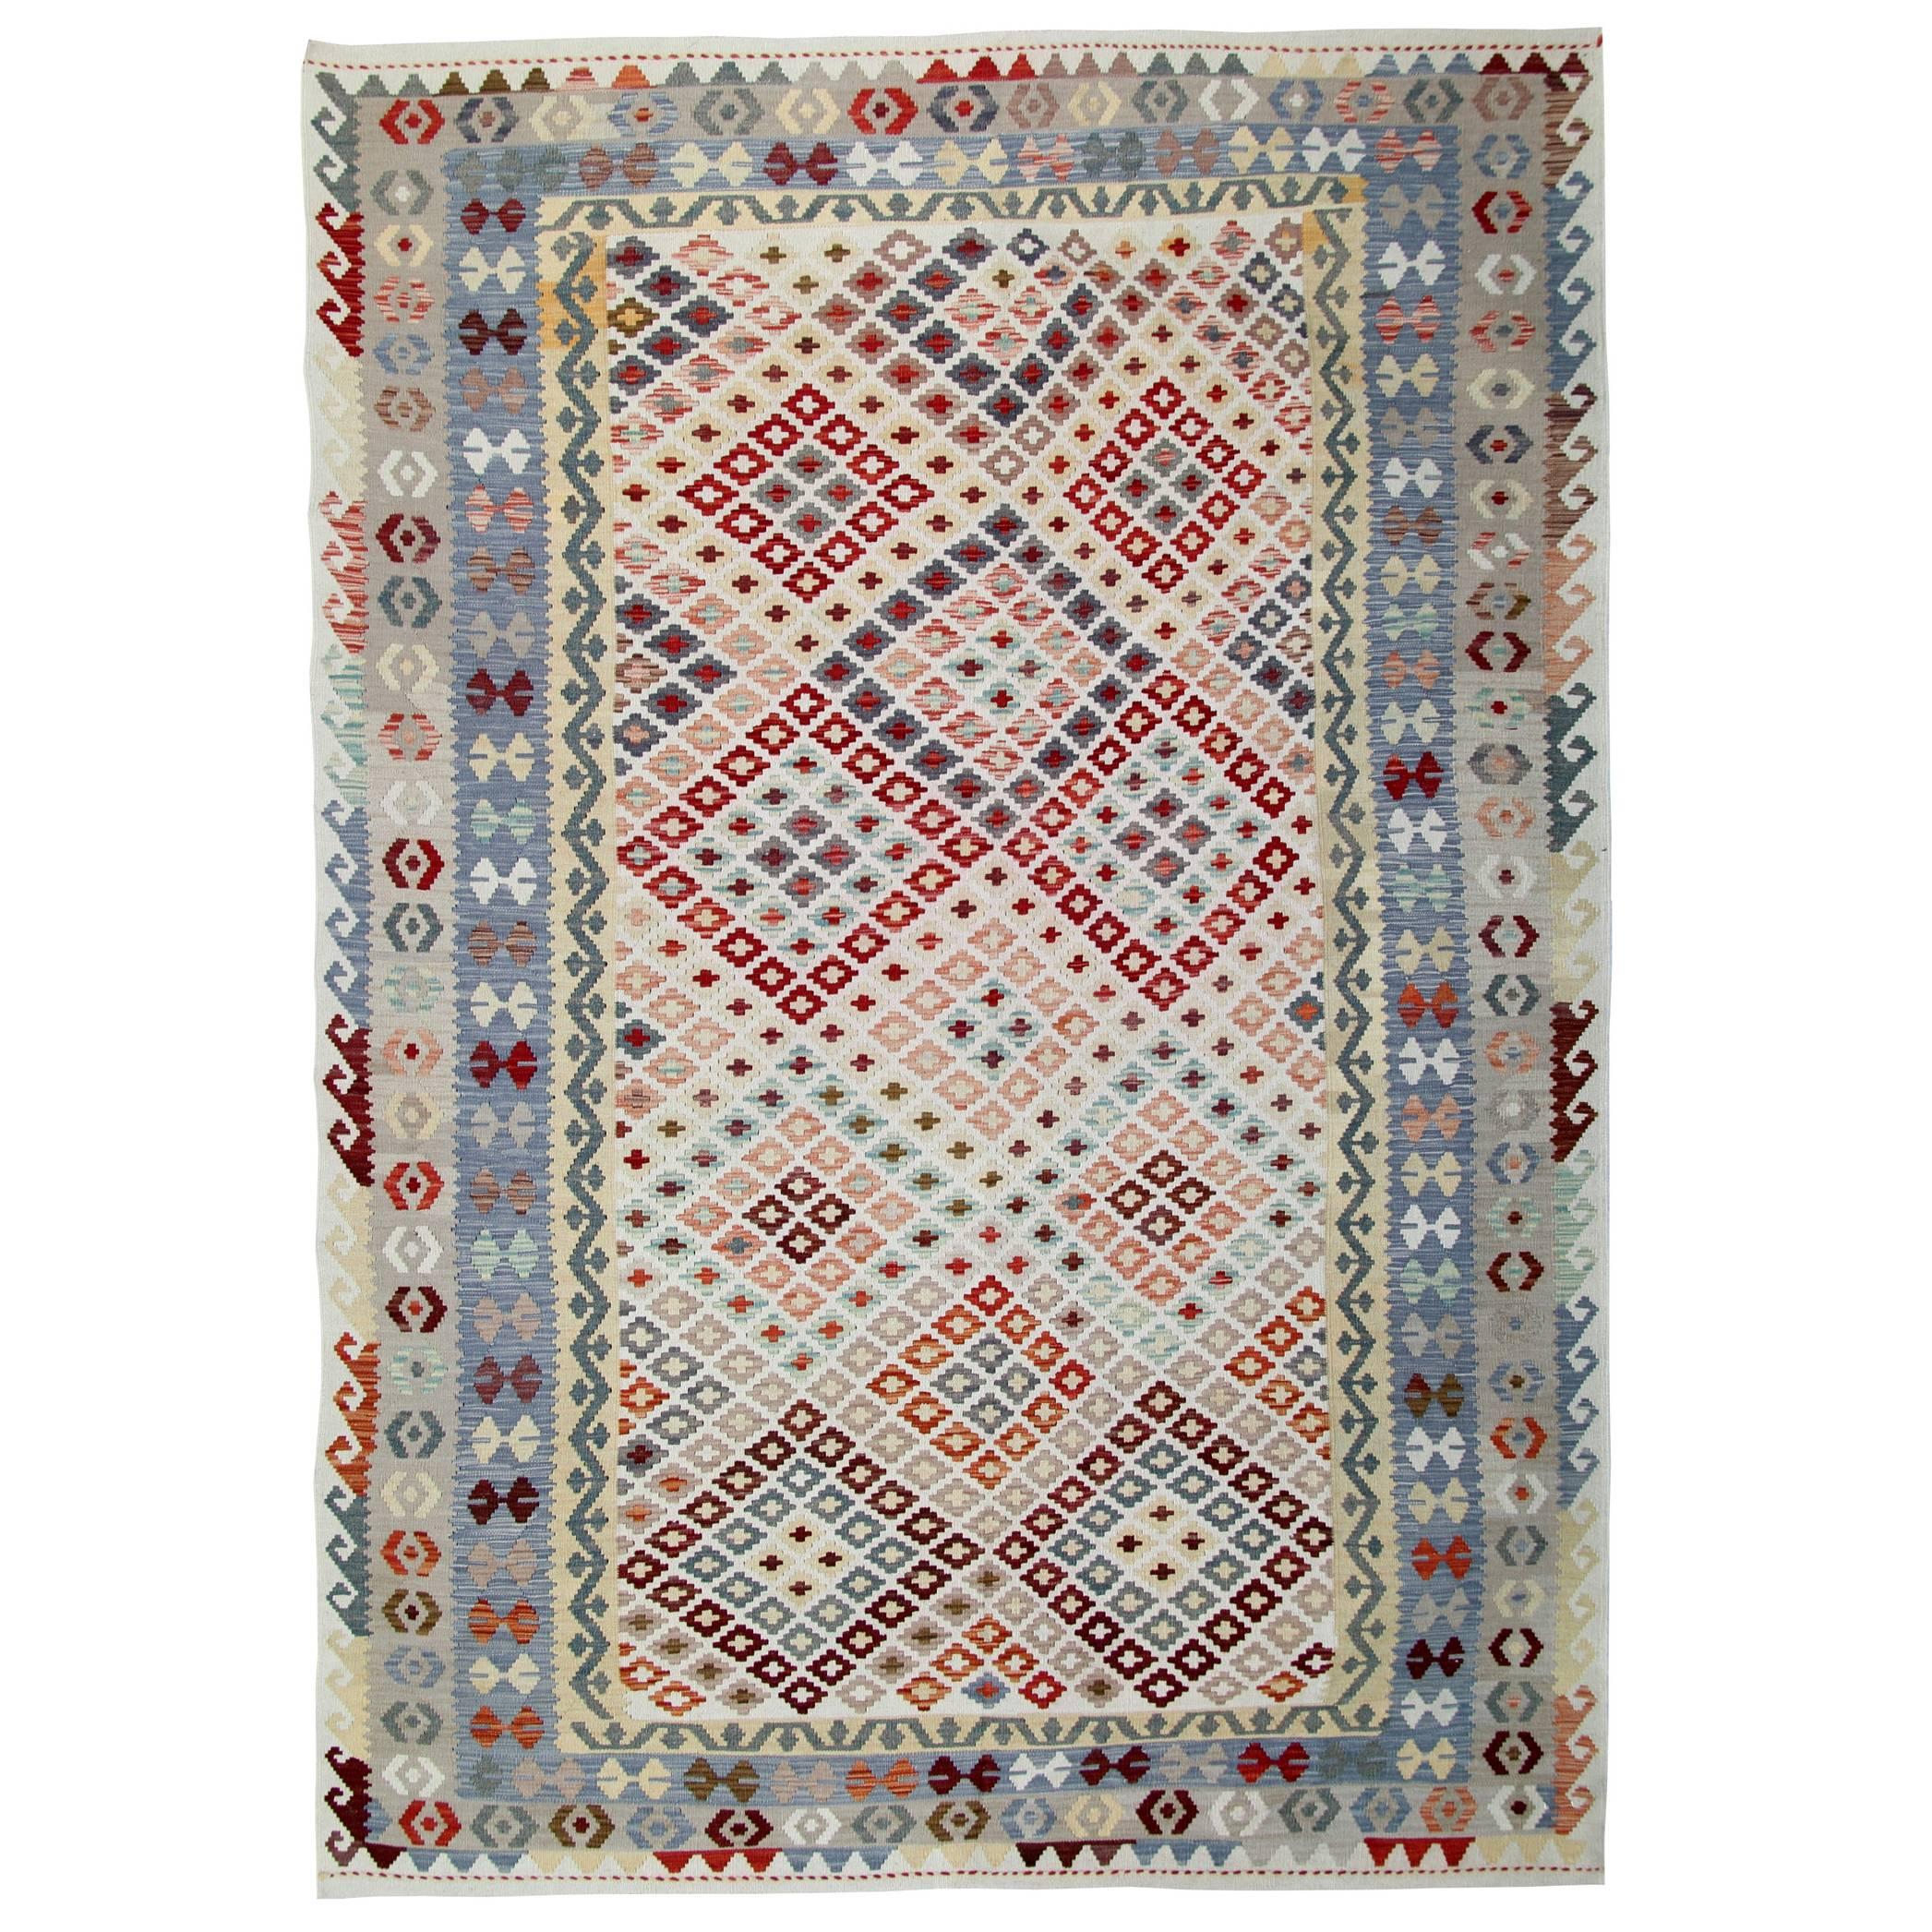 Kilim Rugs, Traditional Rugs from Afghanistan